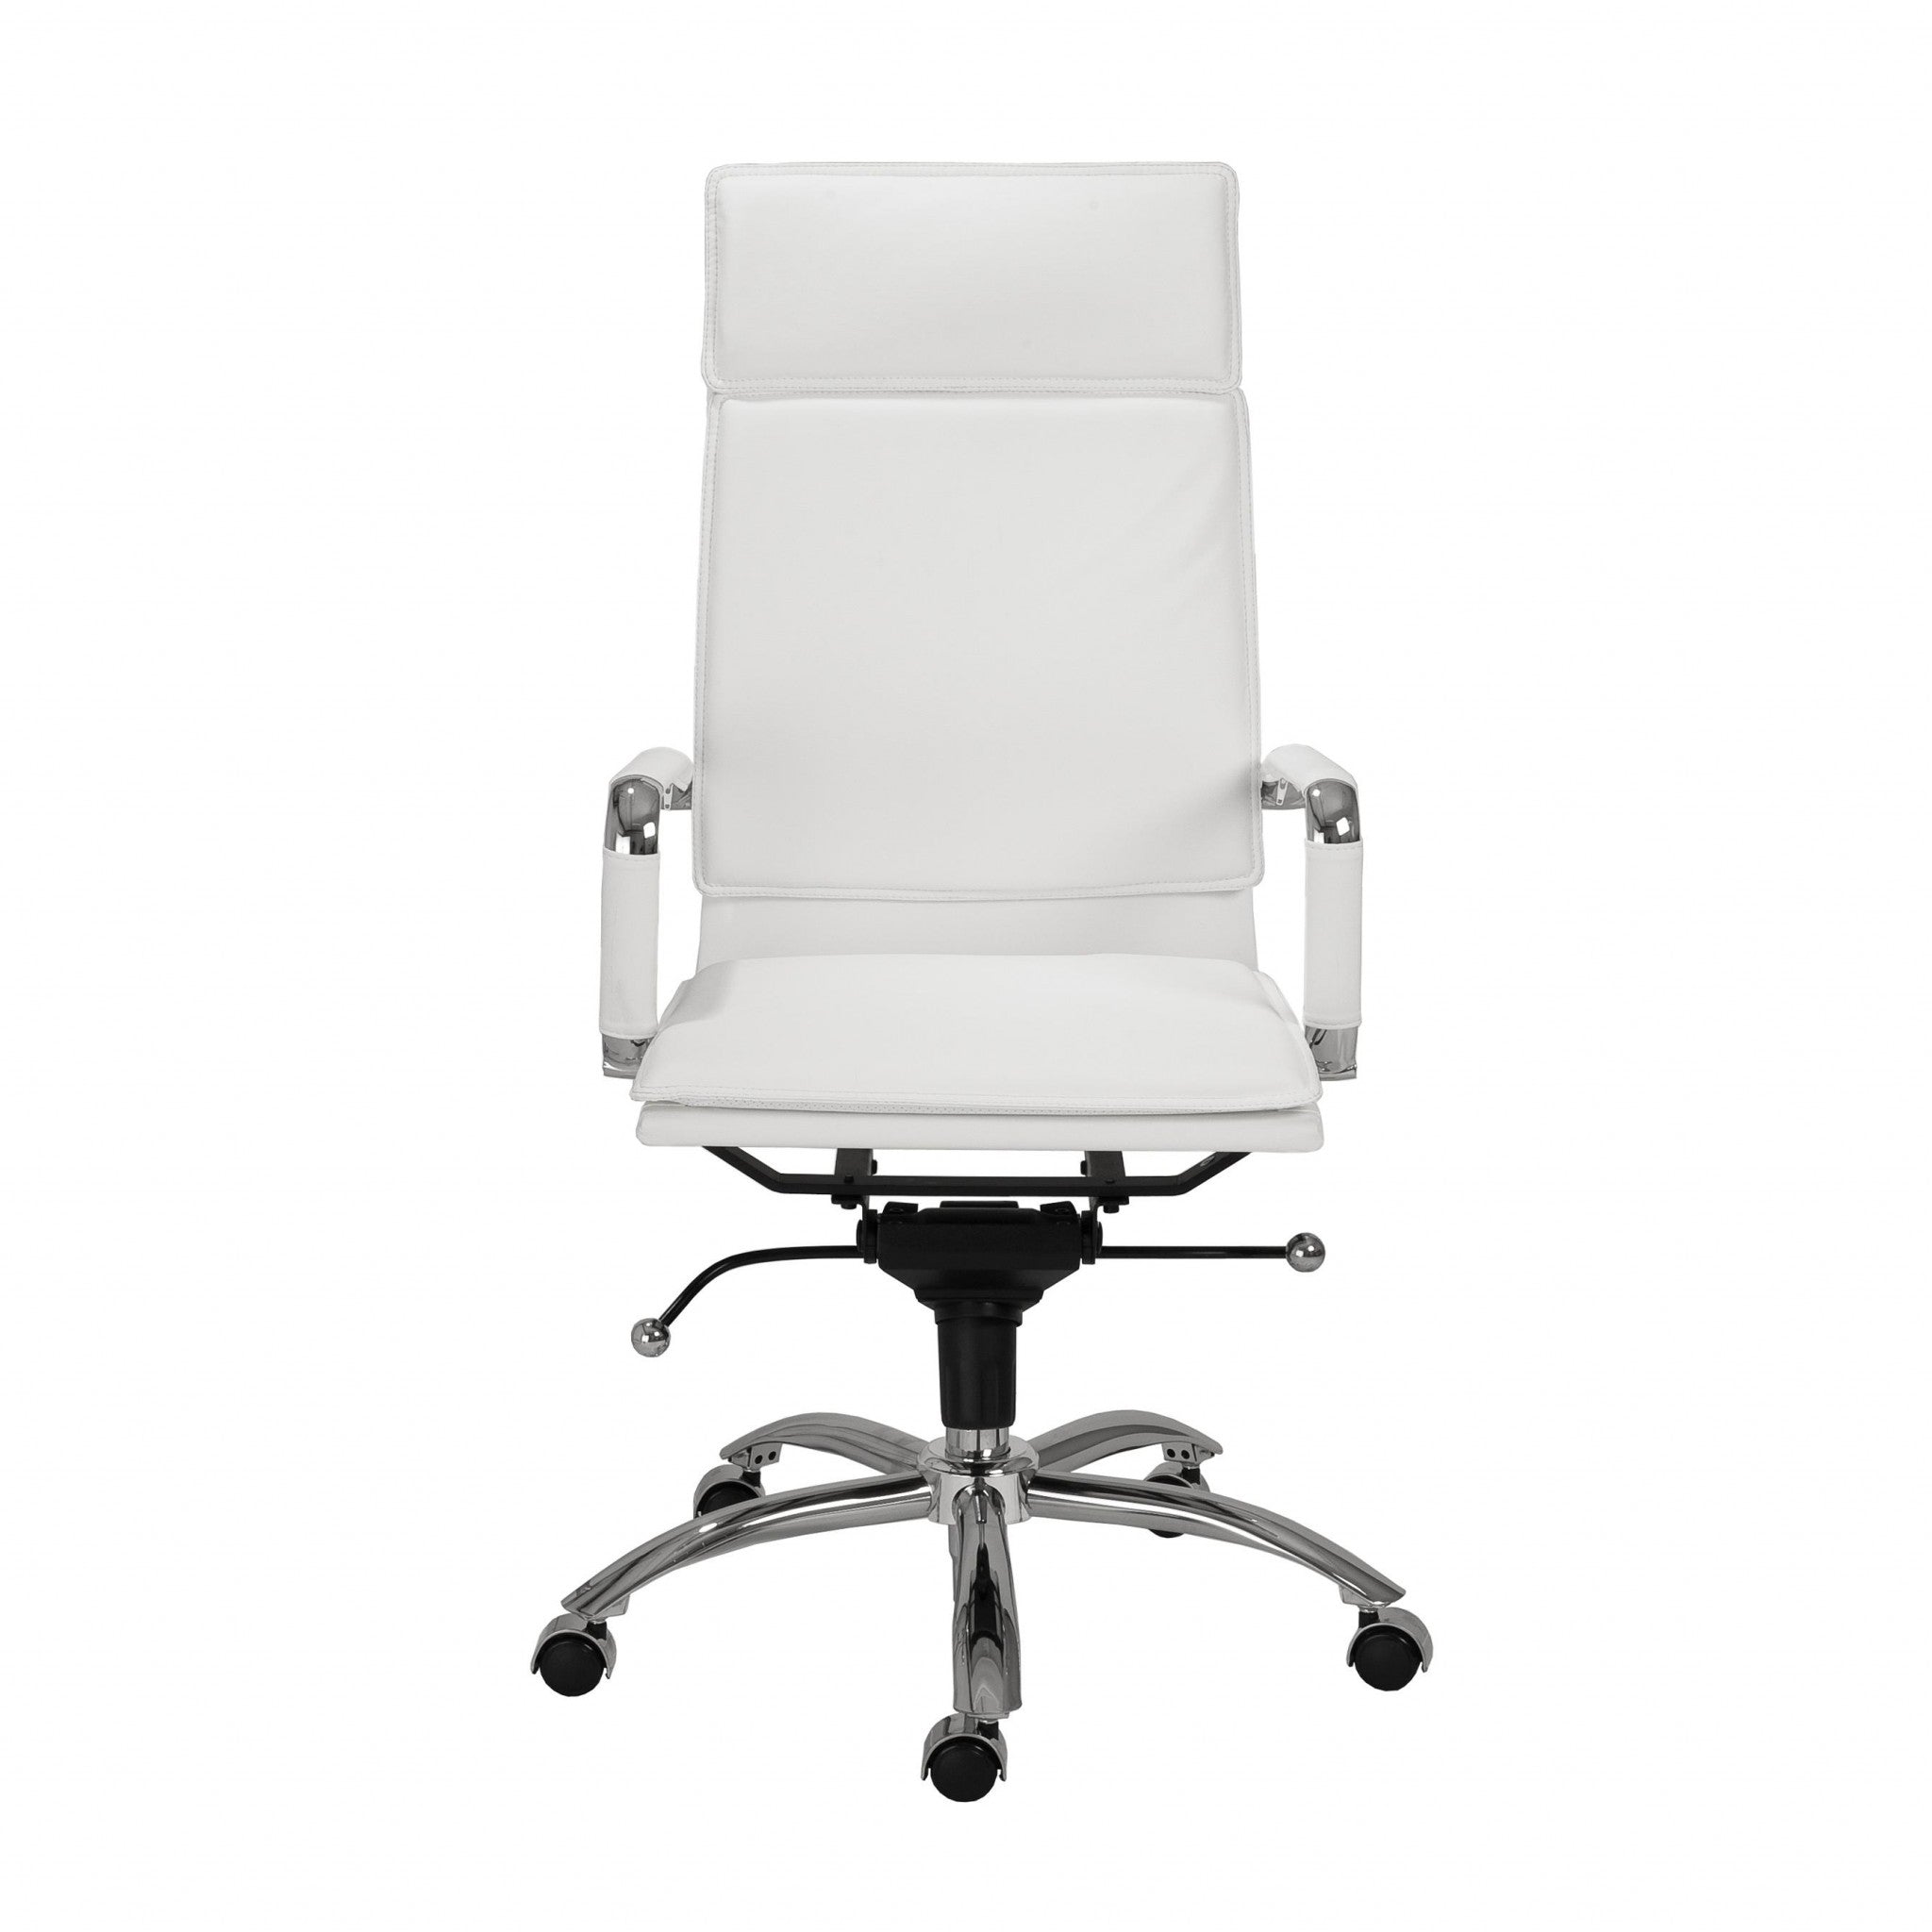 White Faux Leather Seat Swivel Adjustable Task Chair Leather Back Steel Frame